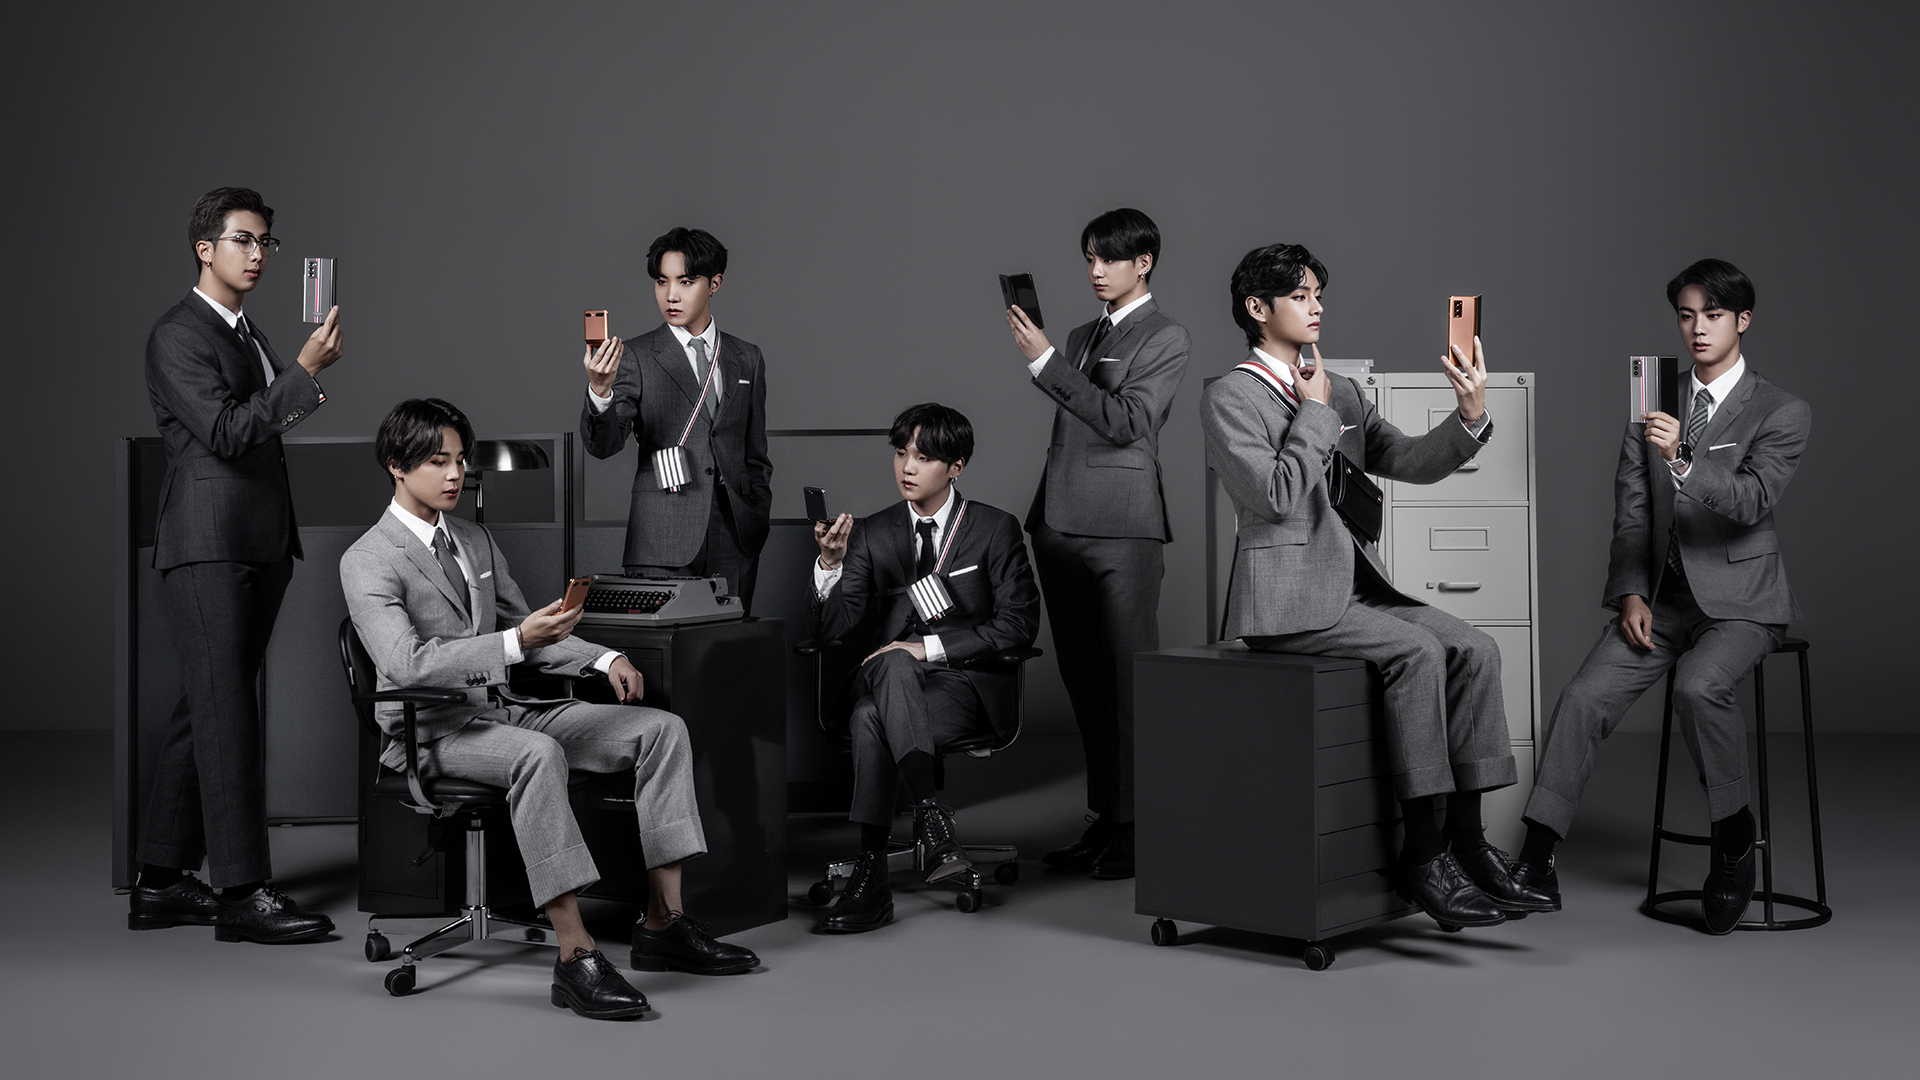 BTS joins the Thom Browne family in grey suits as they admire the Galaxy Z Fold2 Thom Browne Edition. Wide